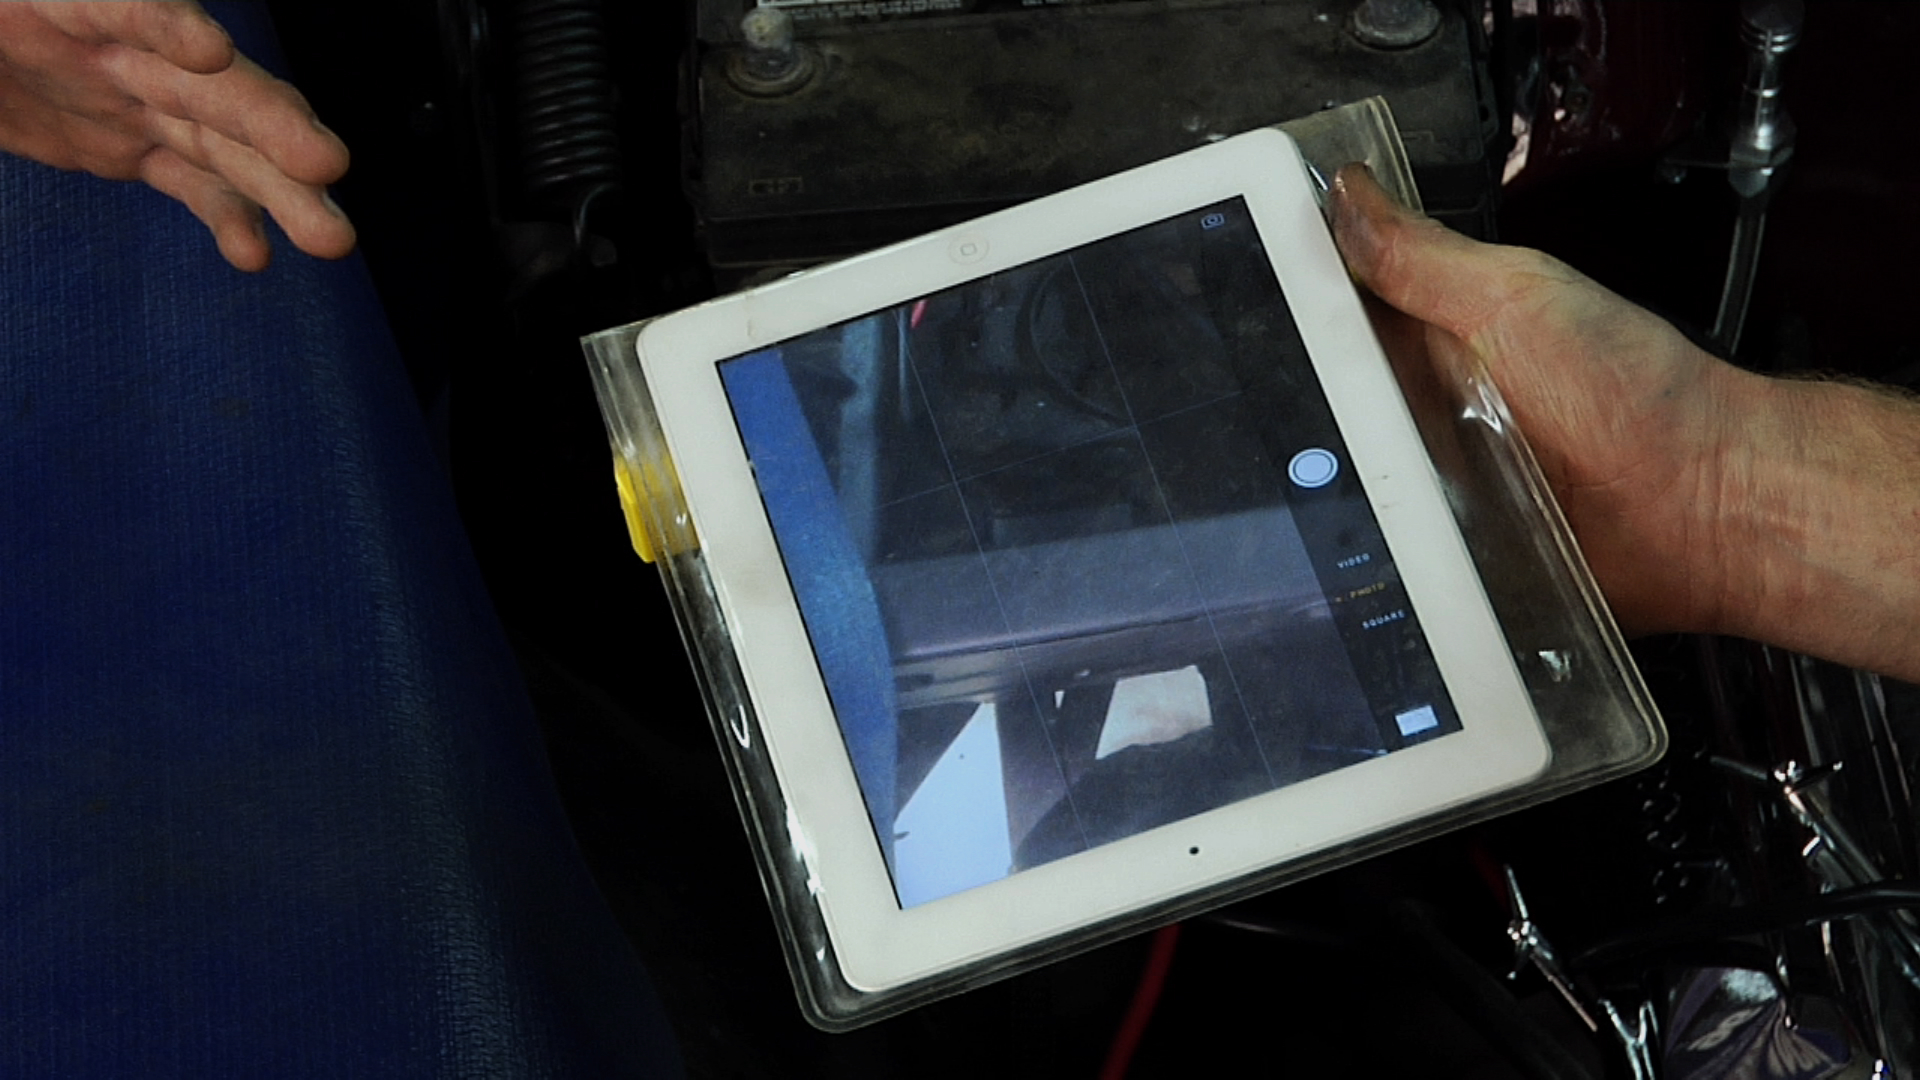 Protect Your Tablet When Working on Auto Repairsproduct featured image thumbnail.